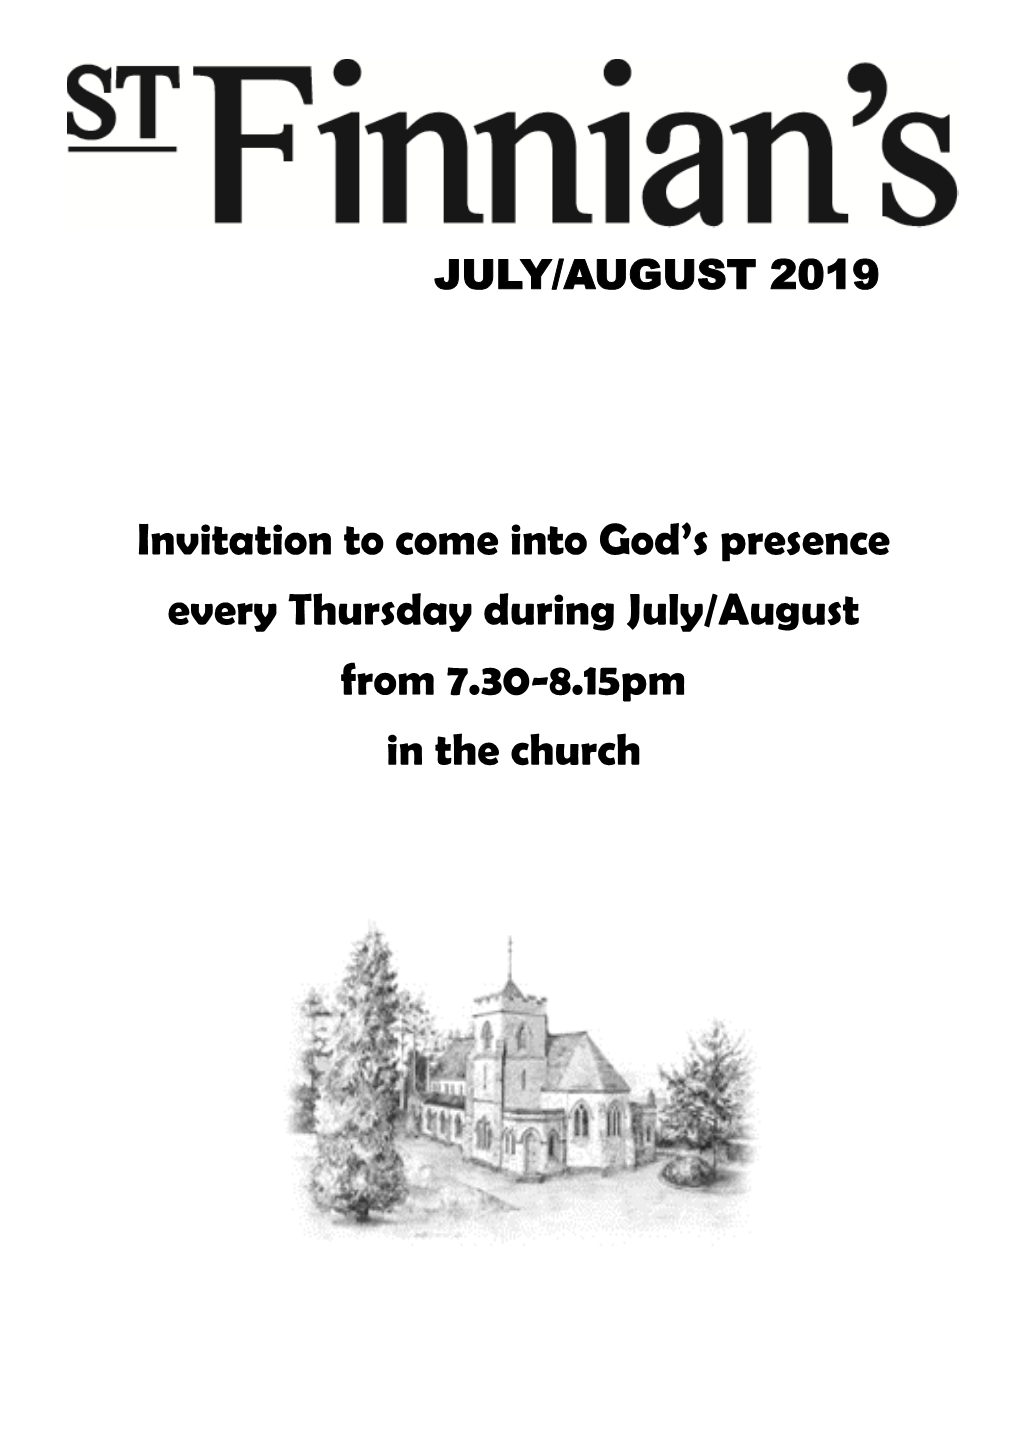 Invitation to Come Into God's Presence Every Thursday During July/August